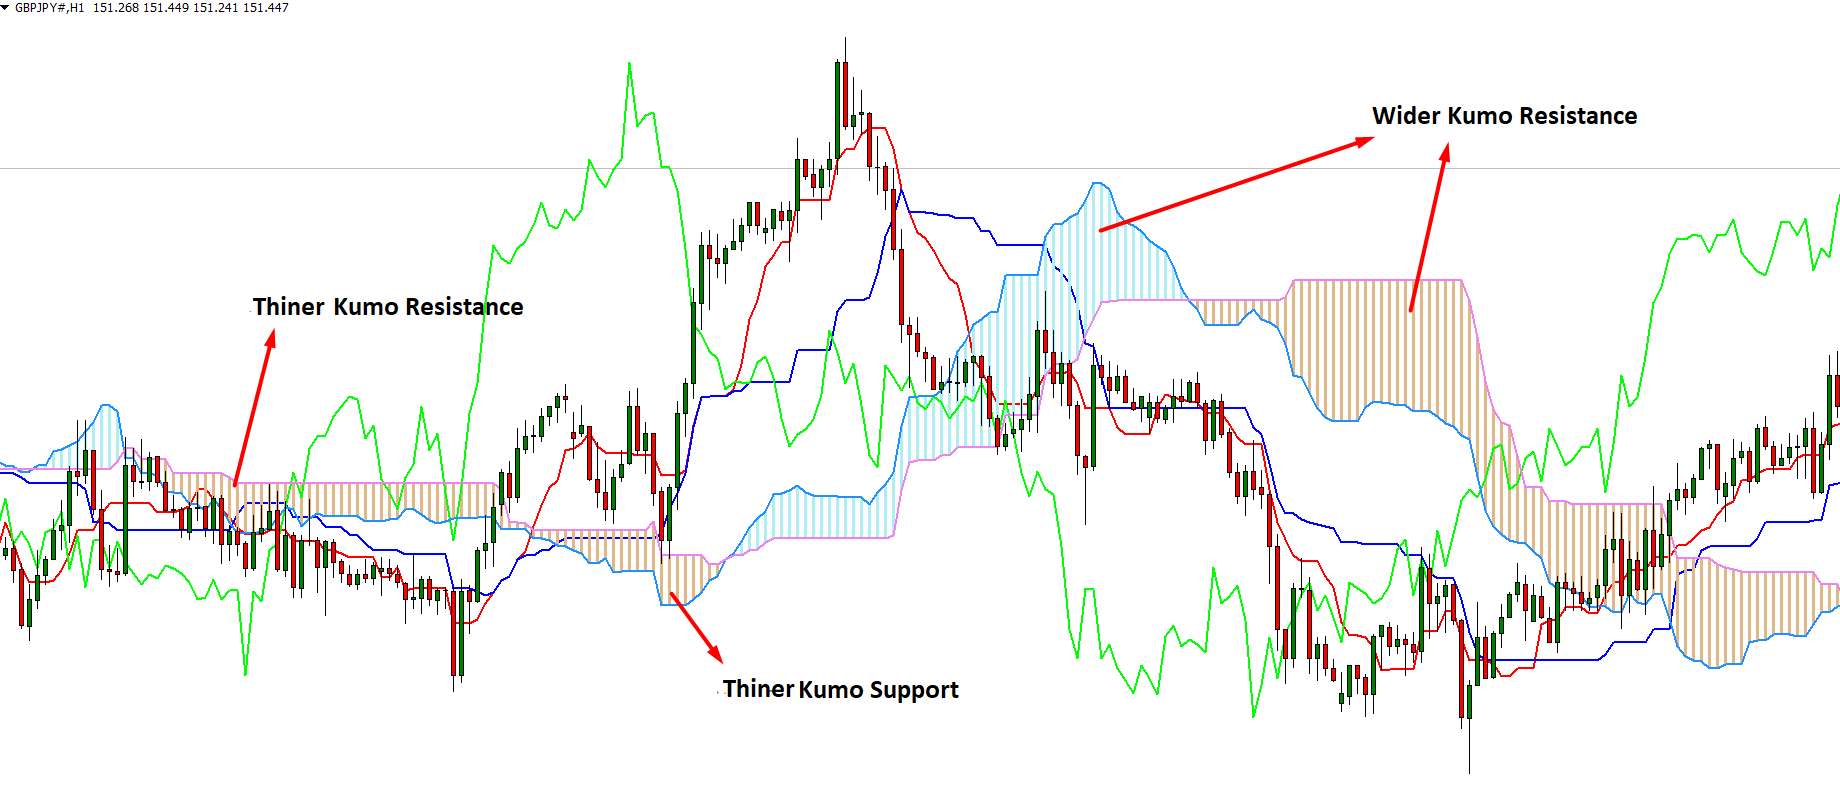 Let’s have a look at a visual representation of the Kumo Cloud support and resistance from the GBP/JPY pair